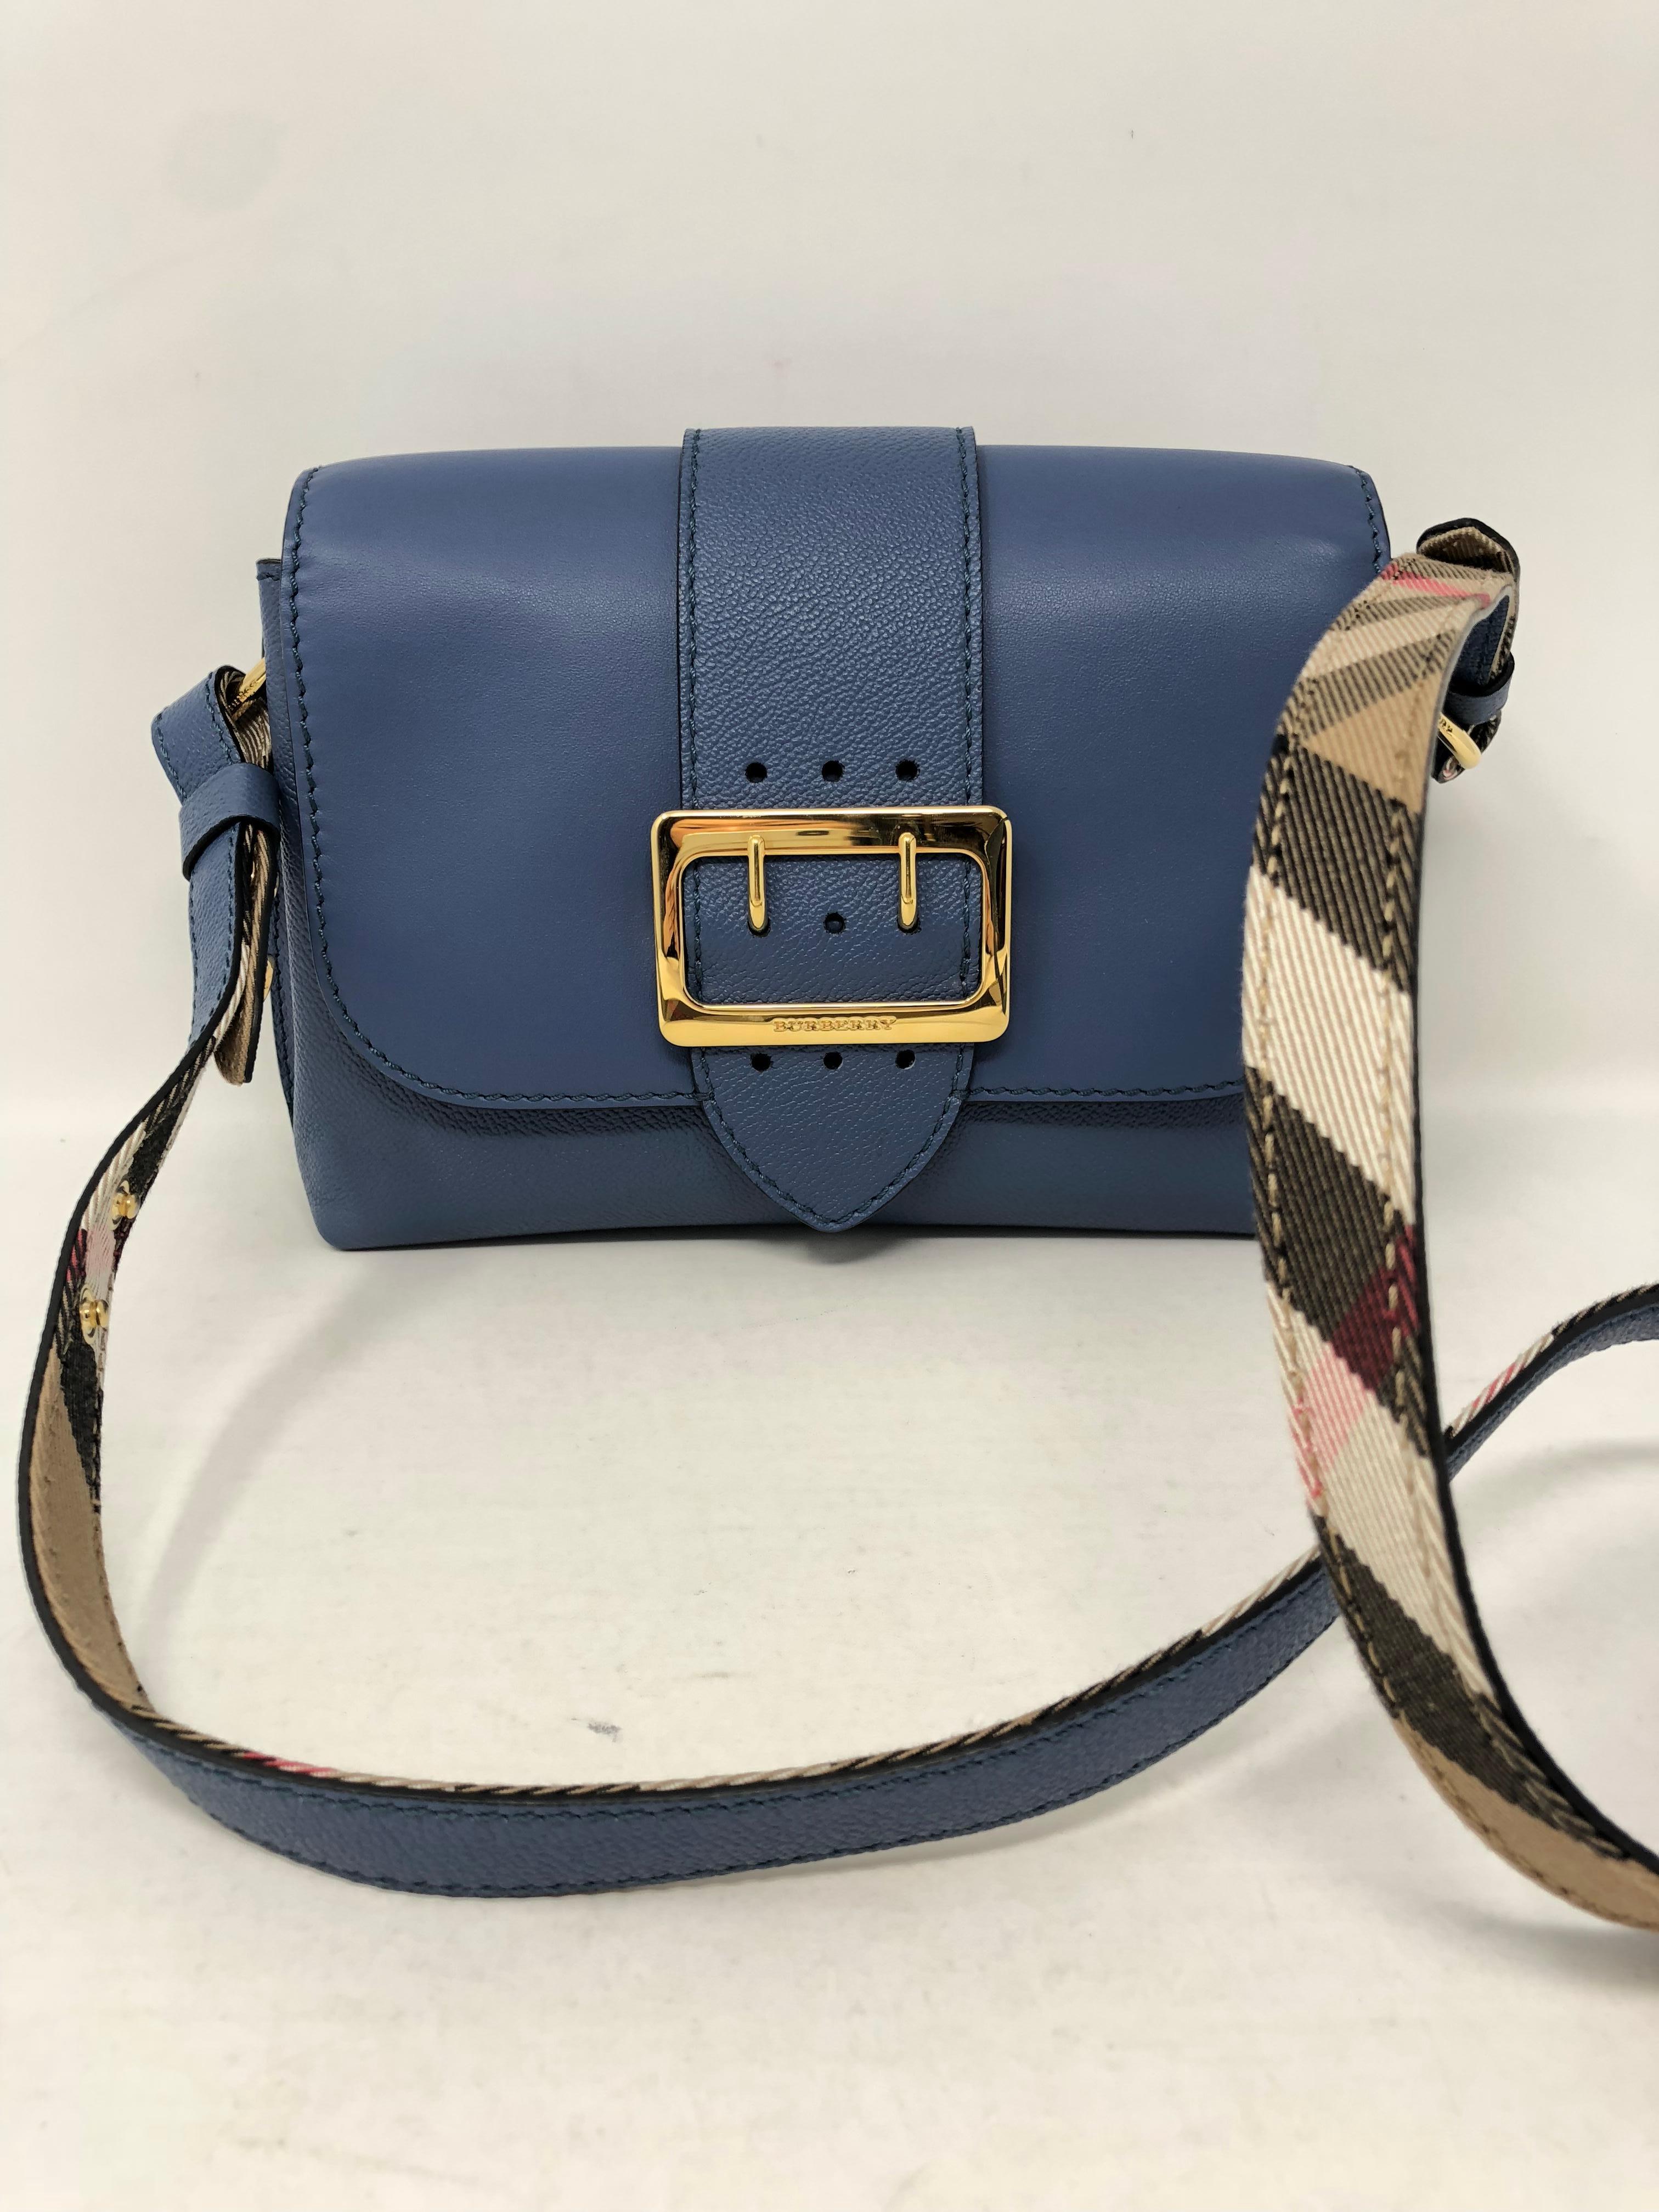 Burberry Crossbody bag with blue leather body. Classic tartan plaid strap and interior. Brand new and never used. Classic style. Guaranteed authentic. 